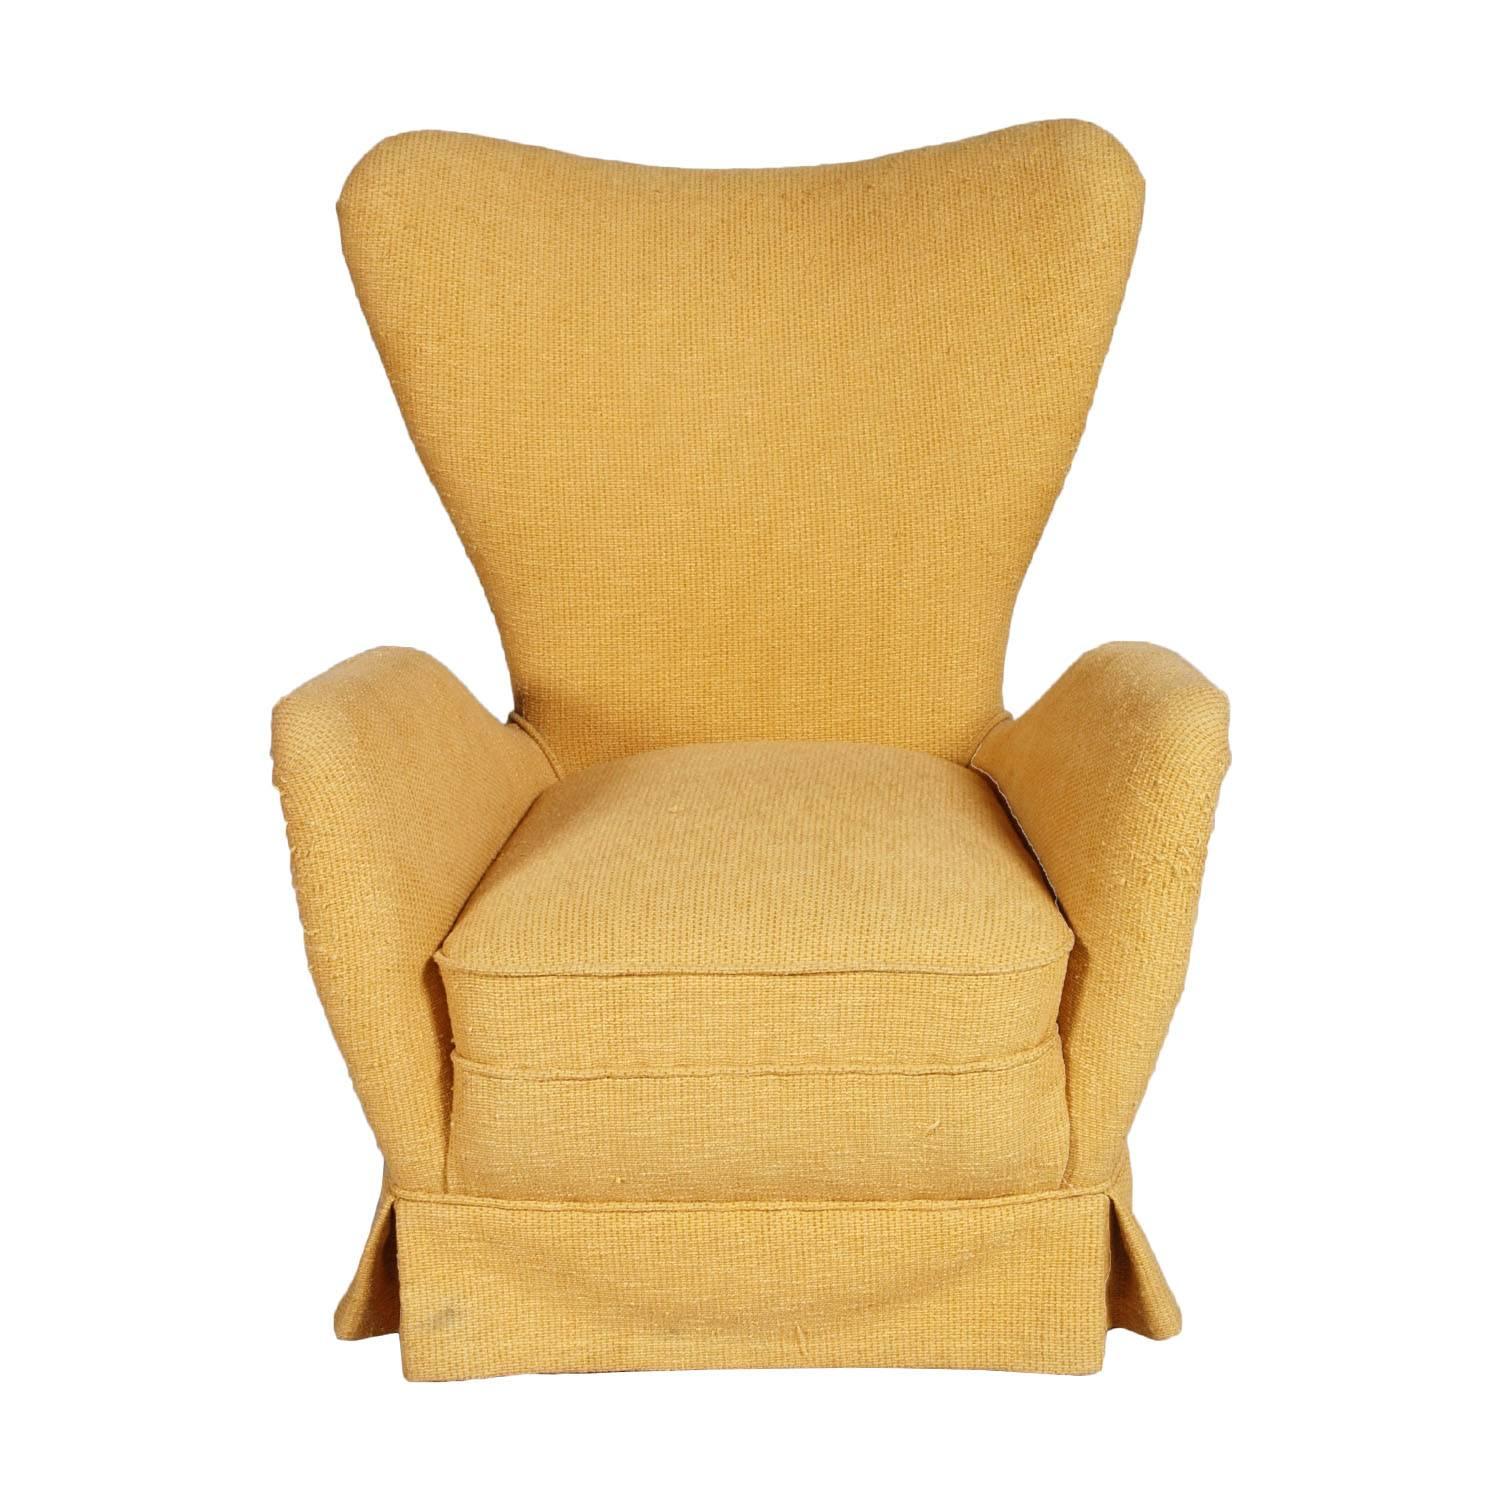 Mid-Century modern armchair Gio Ponti style with original upholstery light yellow raw cotton

Measure in cm: H 85\42  W 70   D 80.